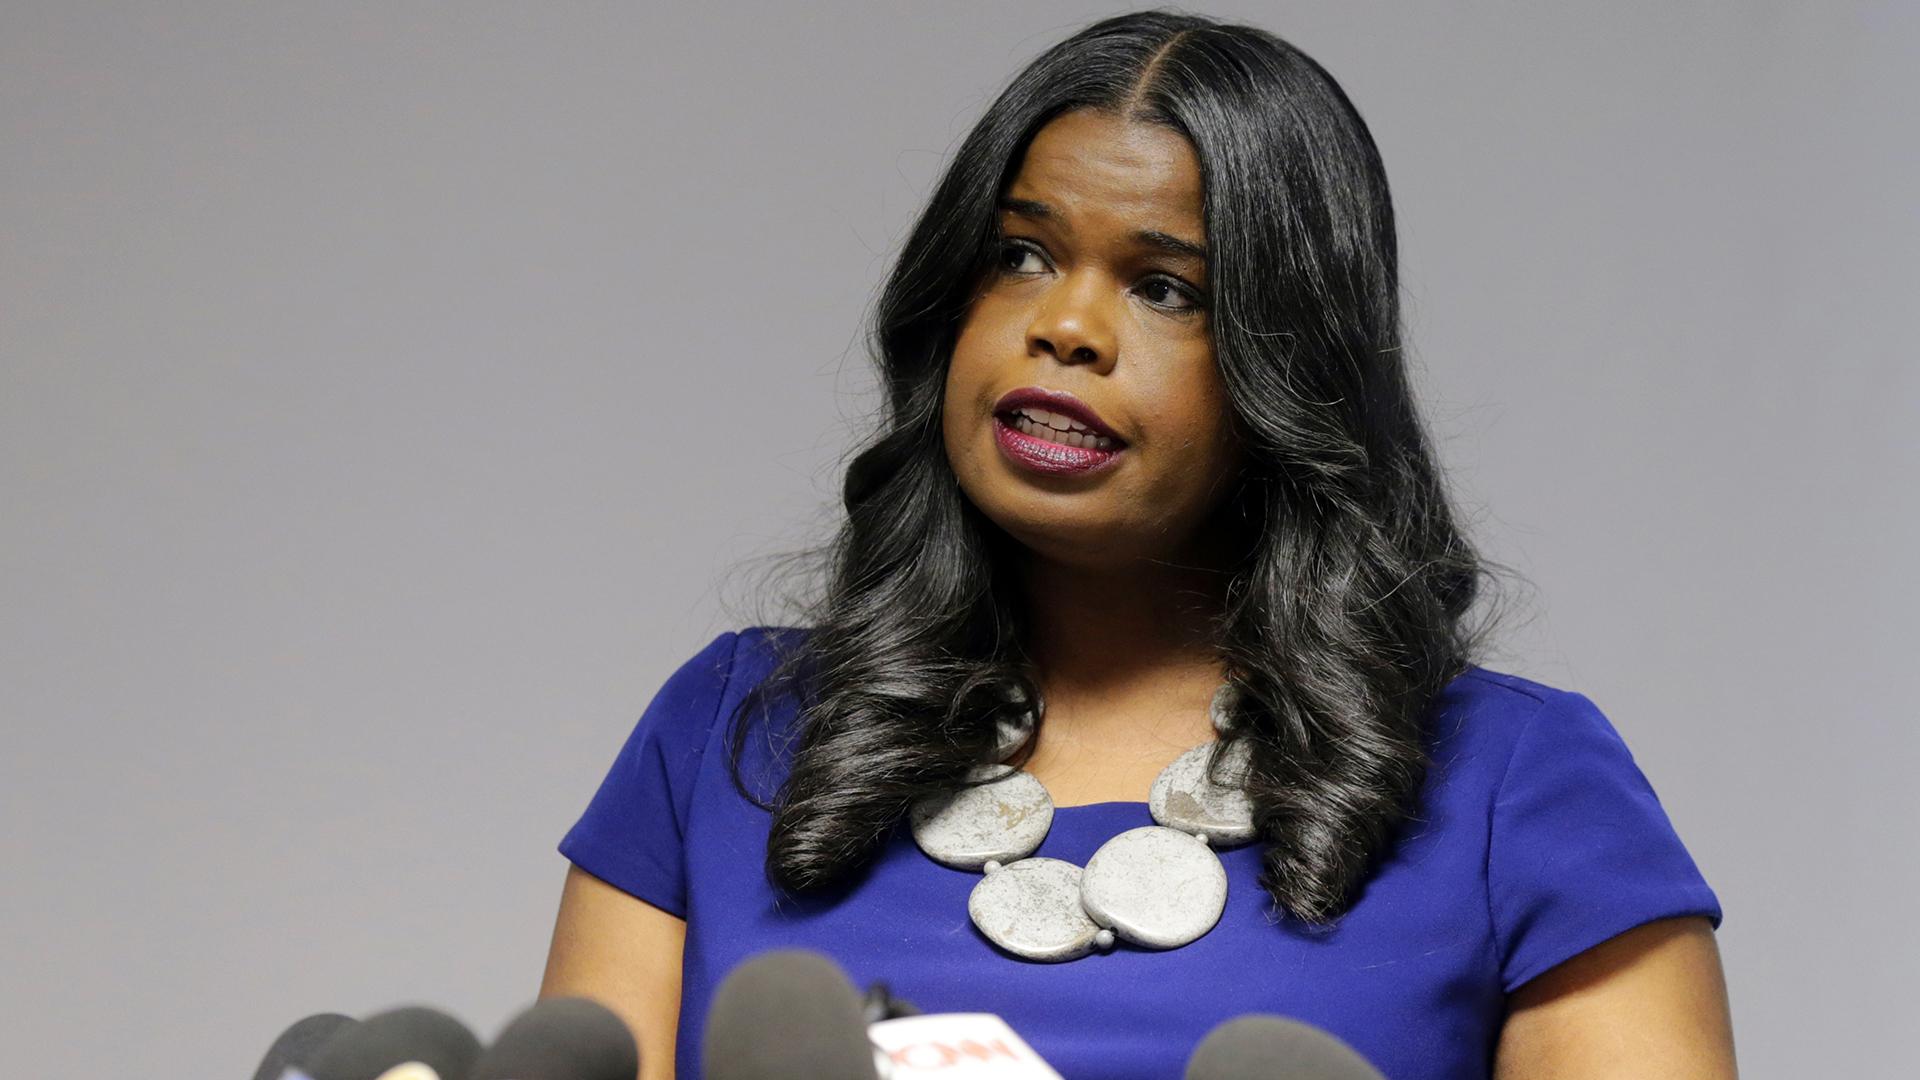 This Feb. 22, 2019 file photo shows Cook County State's Attorney Kim Foxx speaking at a news conference in Chicago. (AP Photo / Kiichiro Sato, File)